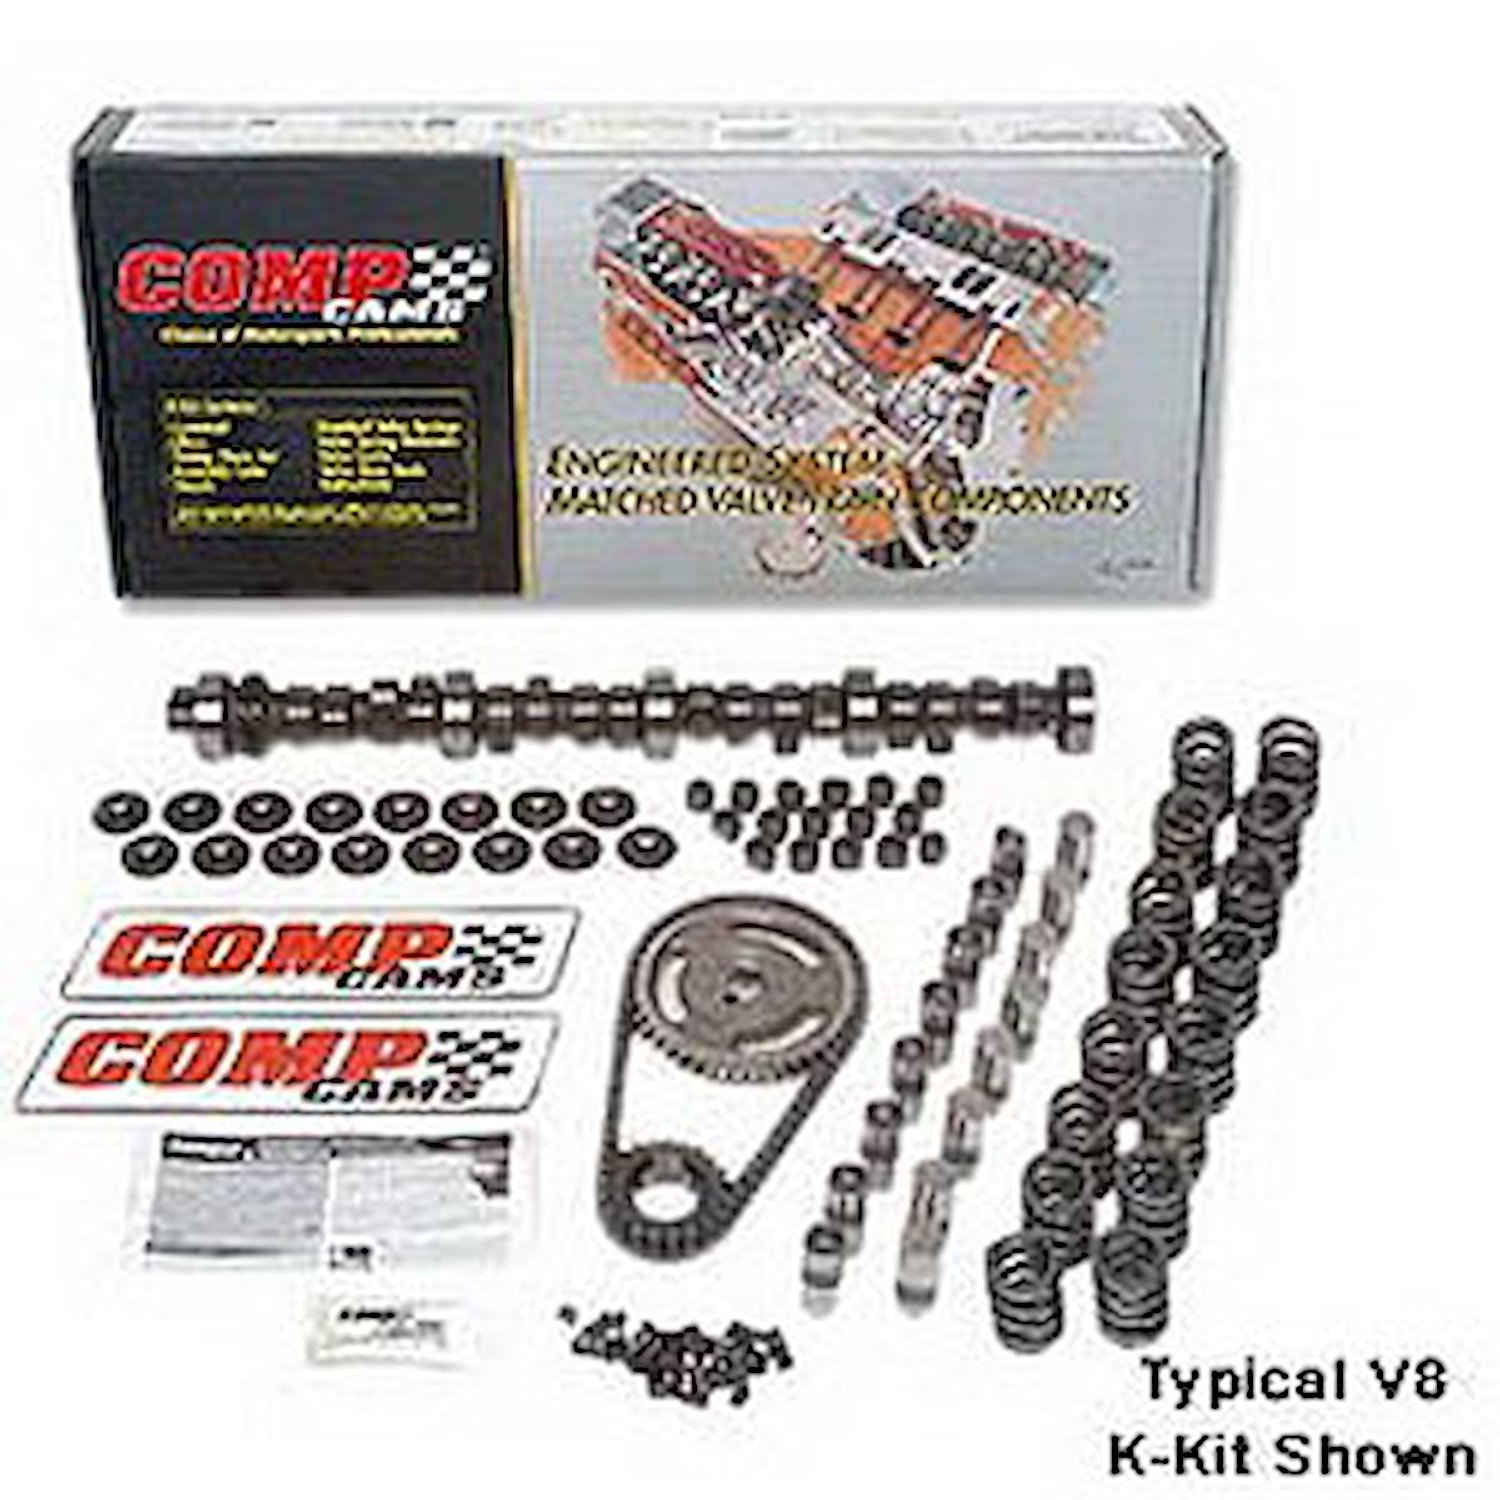 Magnum Hydraulic Roller Camshaft Complete Kit Chevy 4.3L V6 1980-97 Lift: .525"/.525"